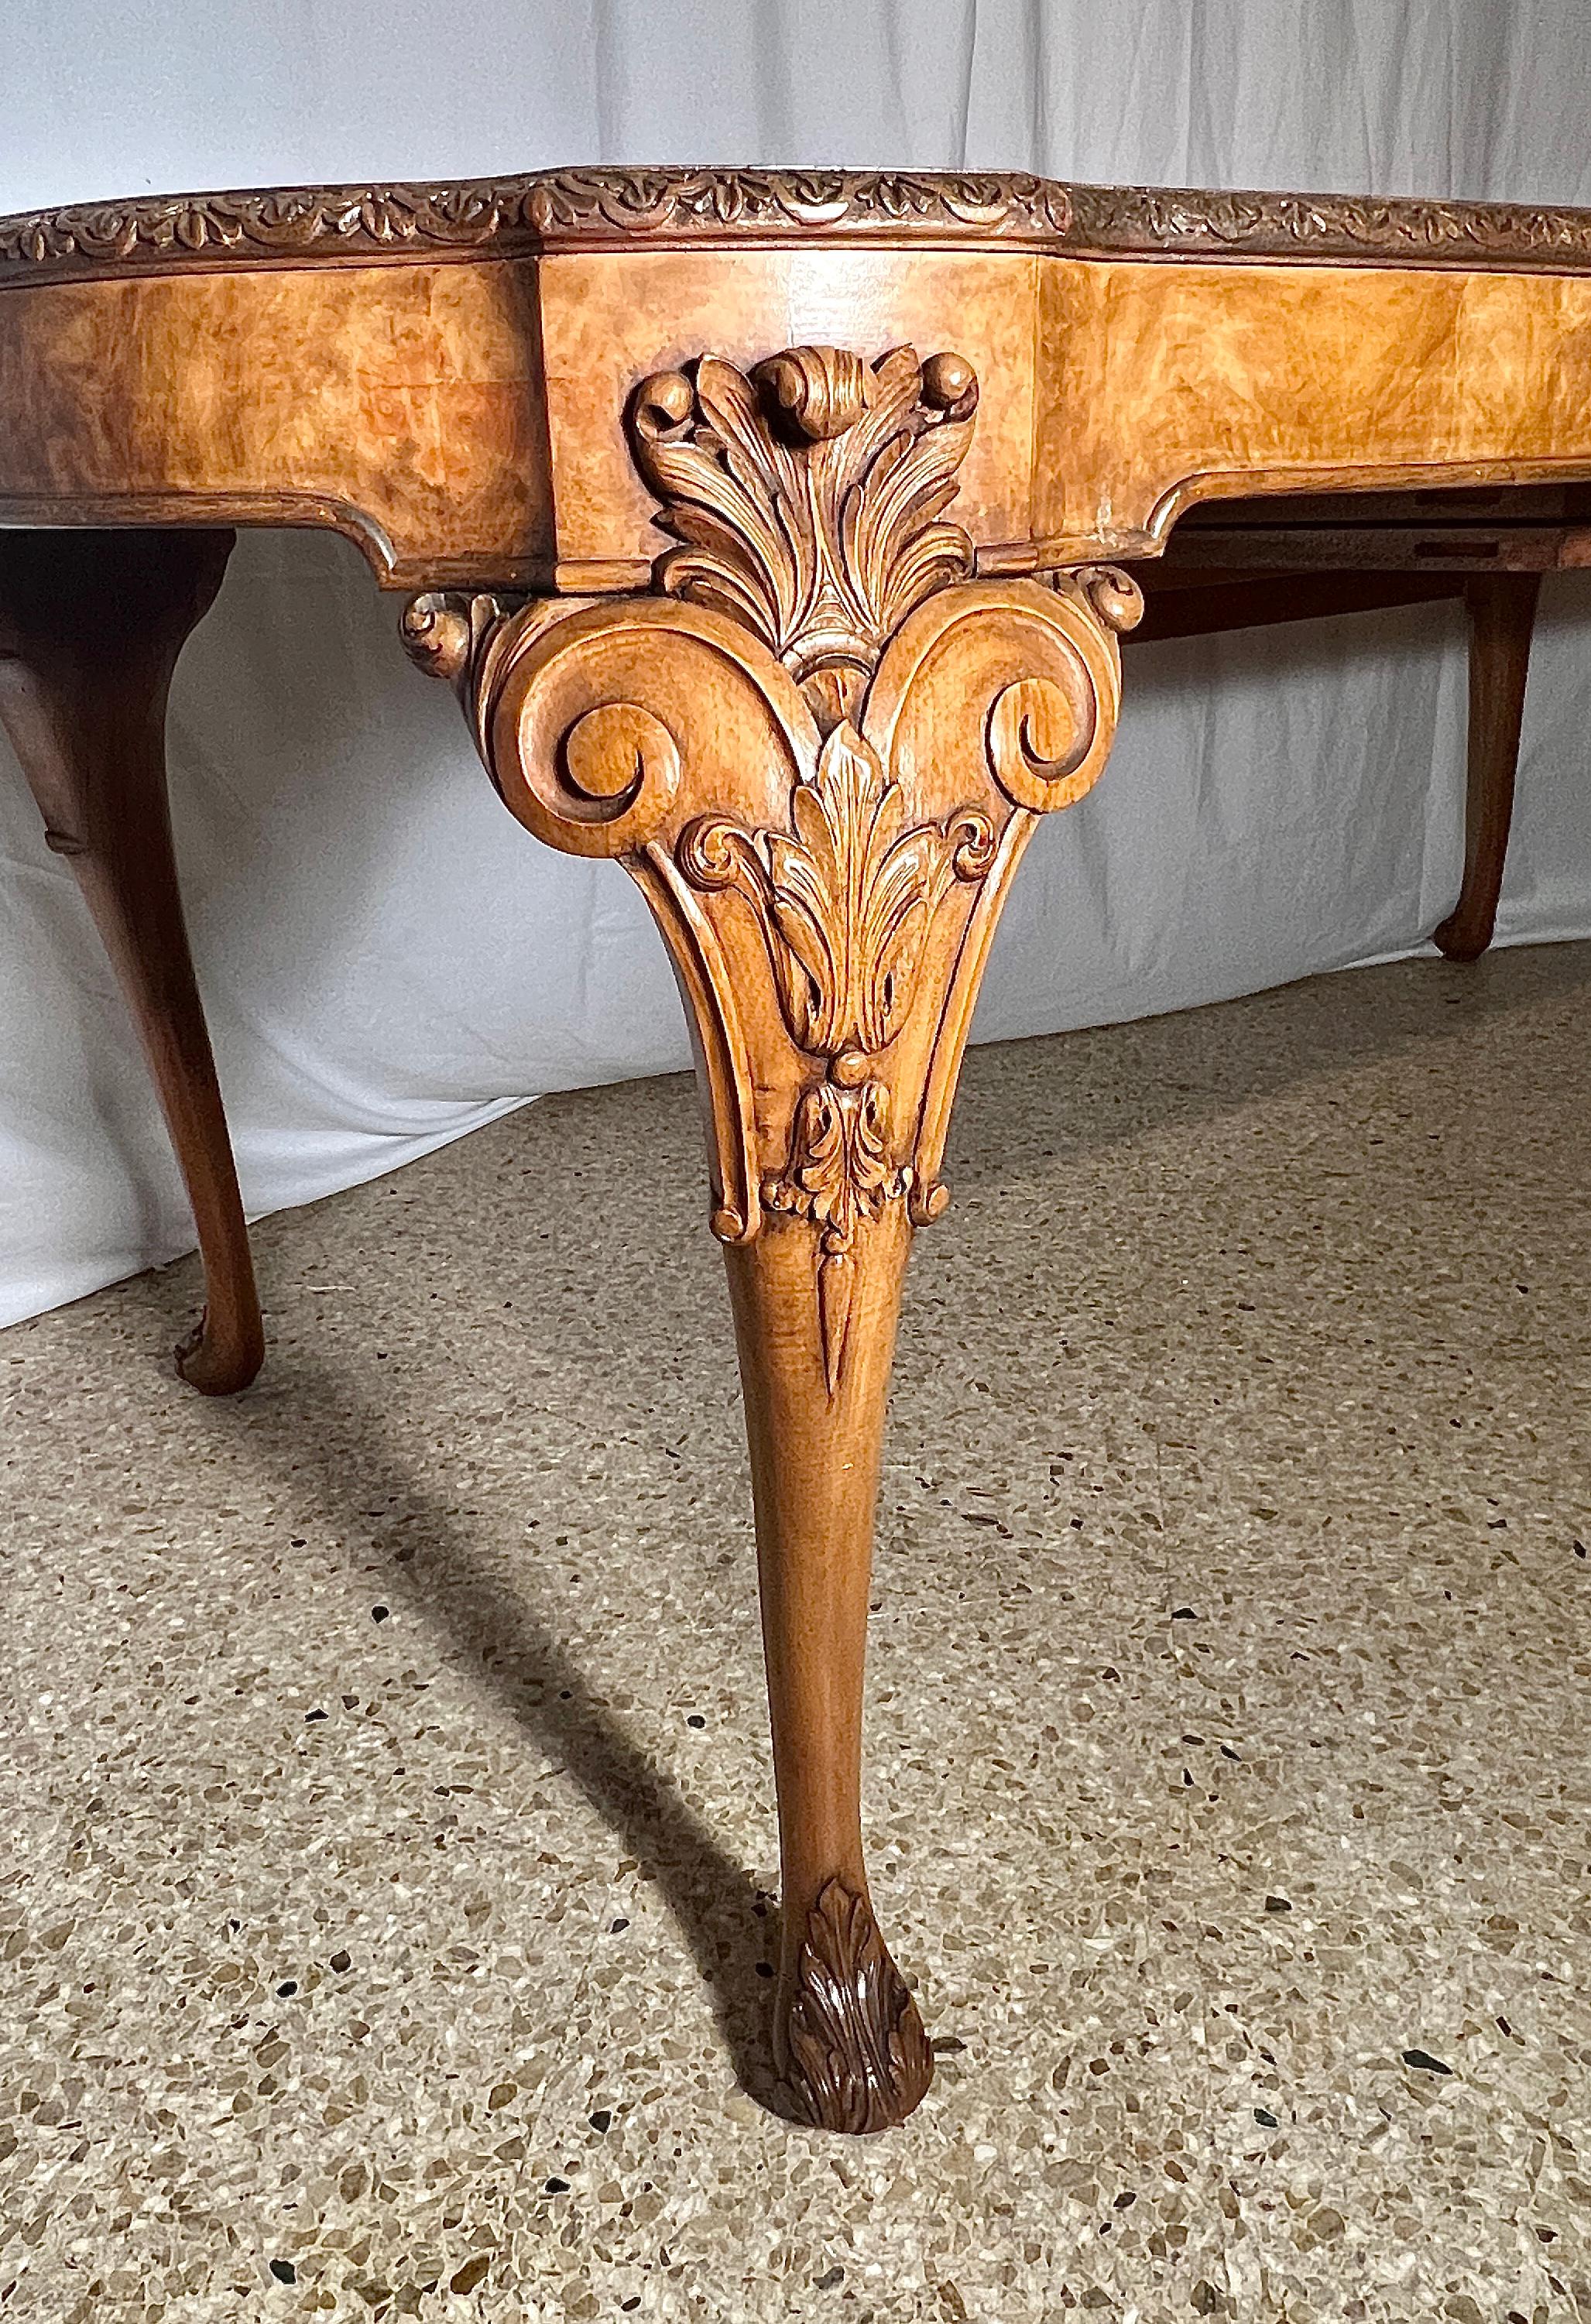 Antique English Carved Burled Walnut Dining Table with Interior Leaf, Circa 1900 For Sale 2